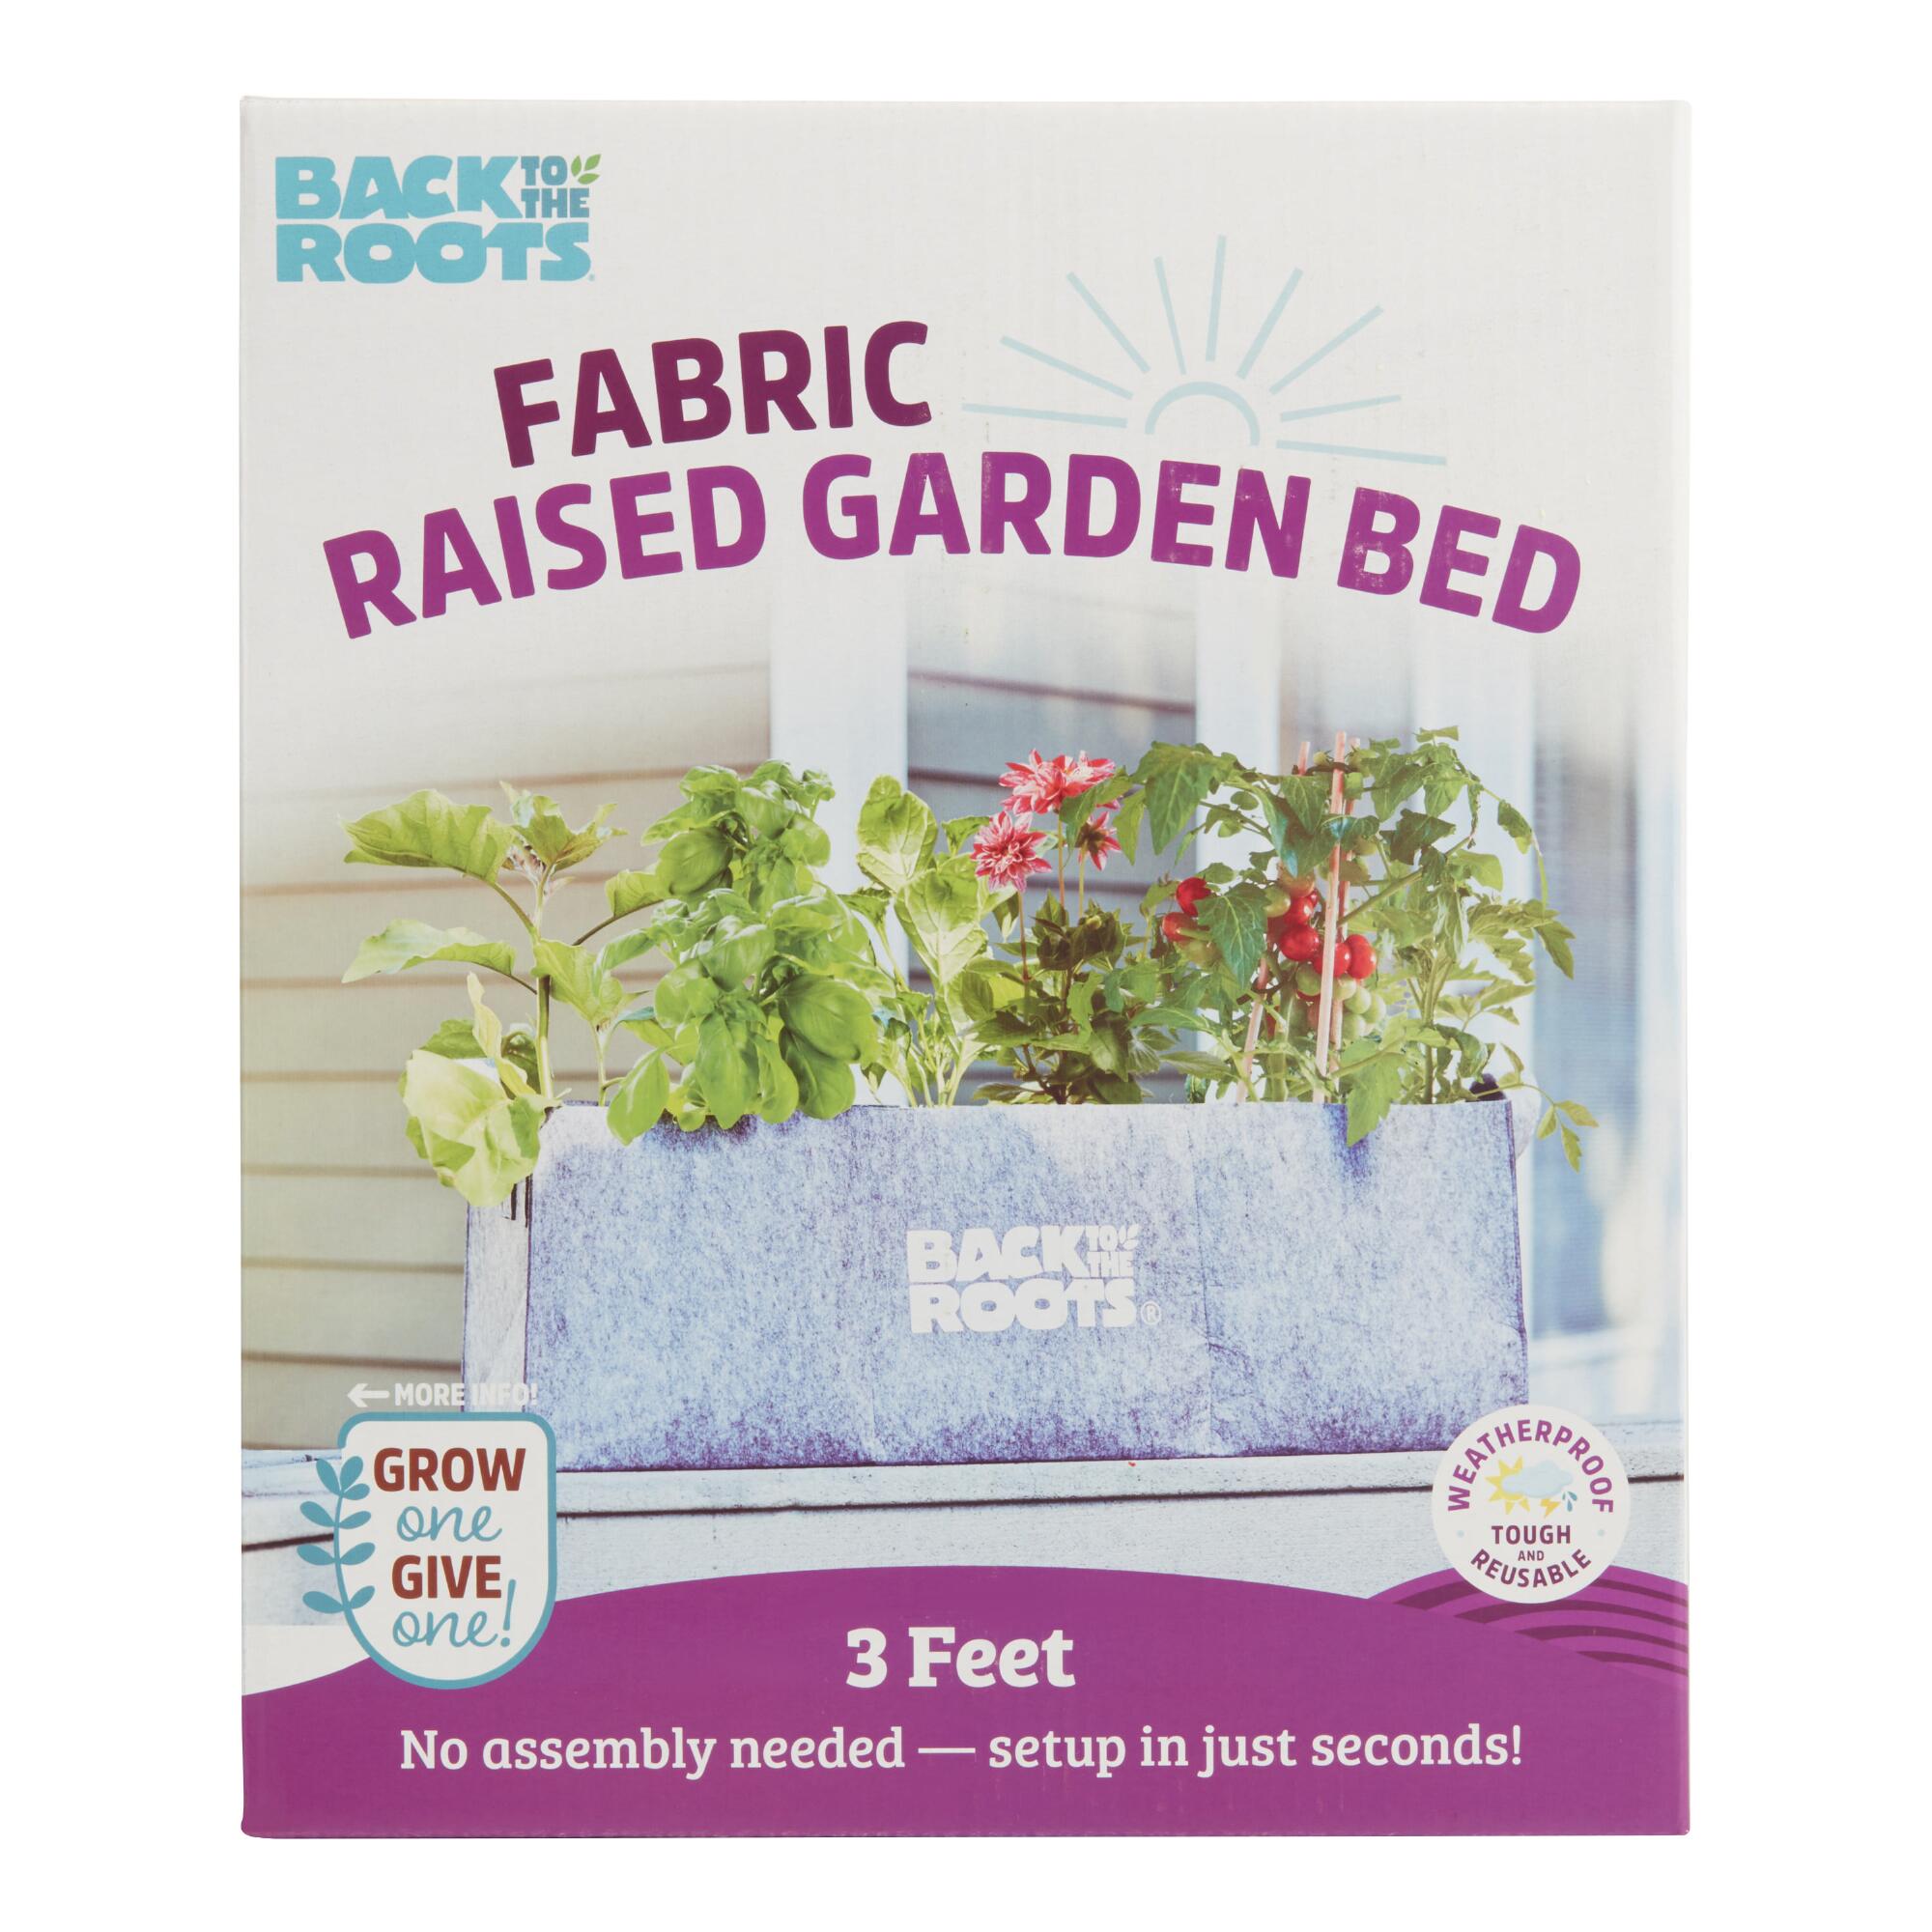 Back to the Roots Fabric Raised Garden Bed: Multi - Felt by World Market